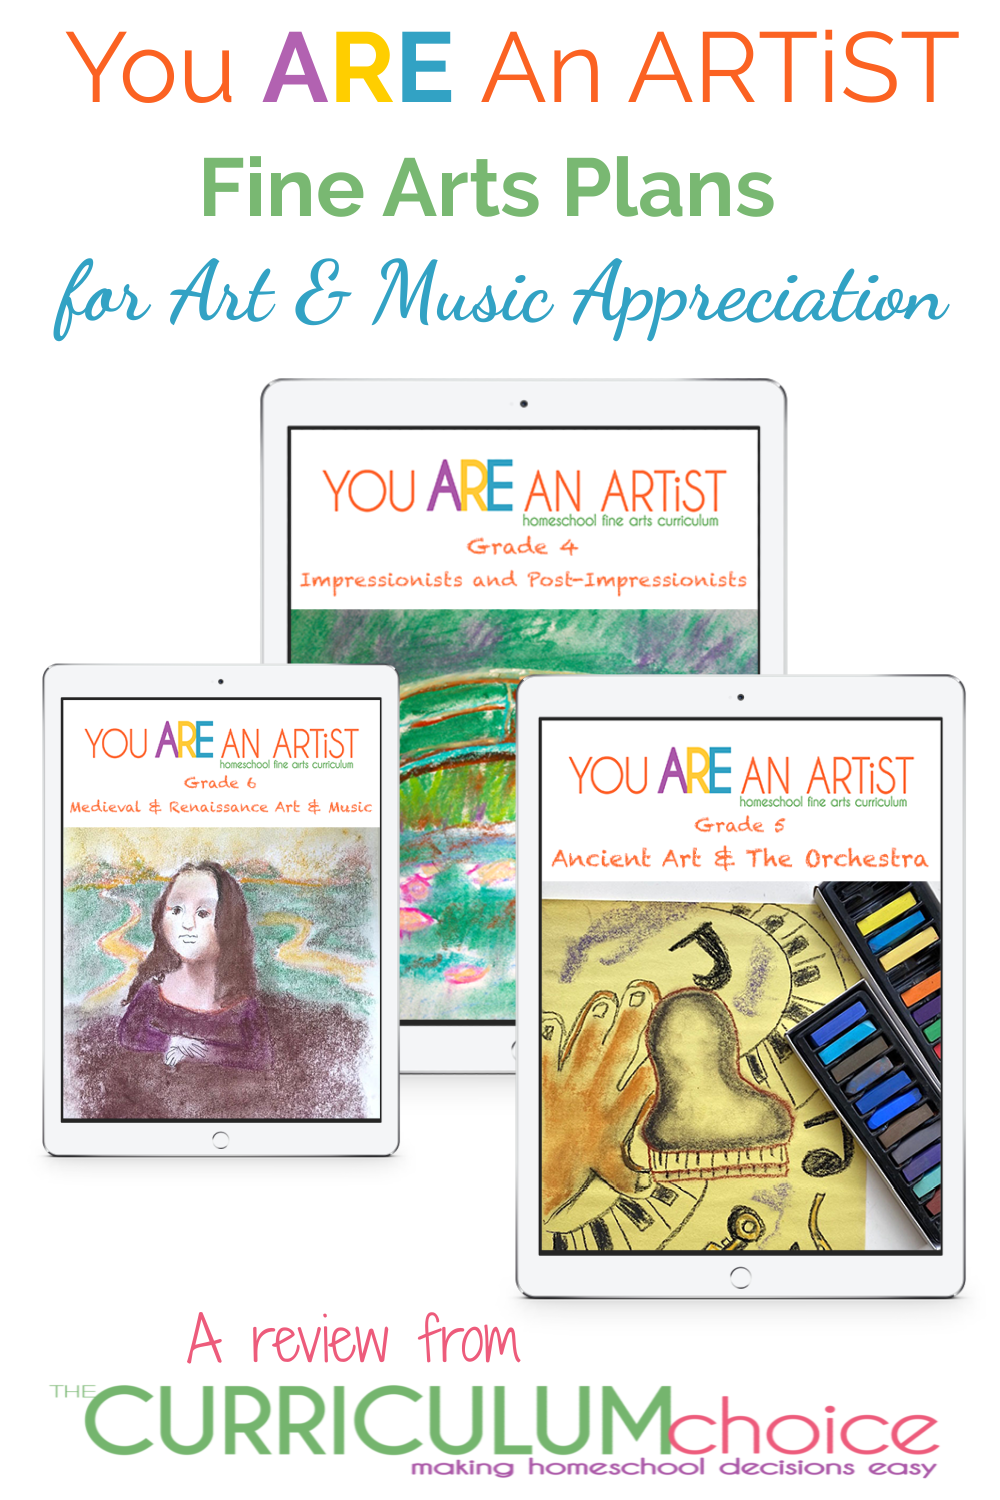 https://www.thecurriculumchoice.com/wp-content/uploads/2012/04/You-ARE-An-ARTiST-Fine-Arts-Plans-for-Art-and-Music-Appreciation.png